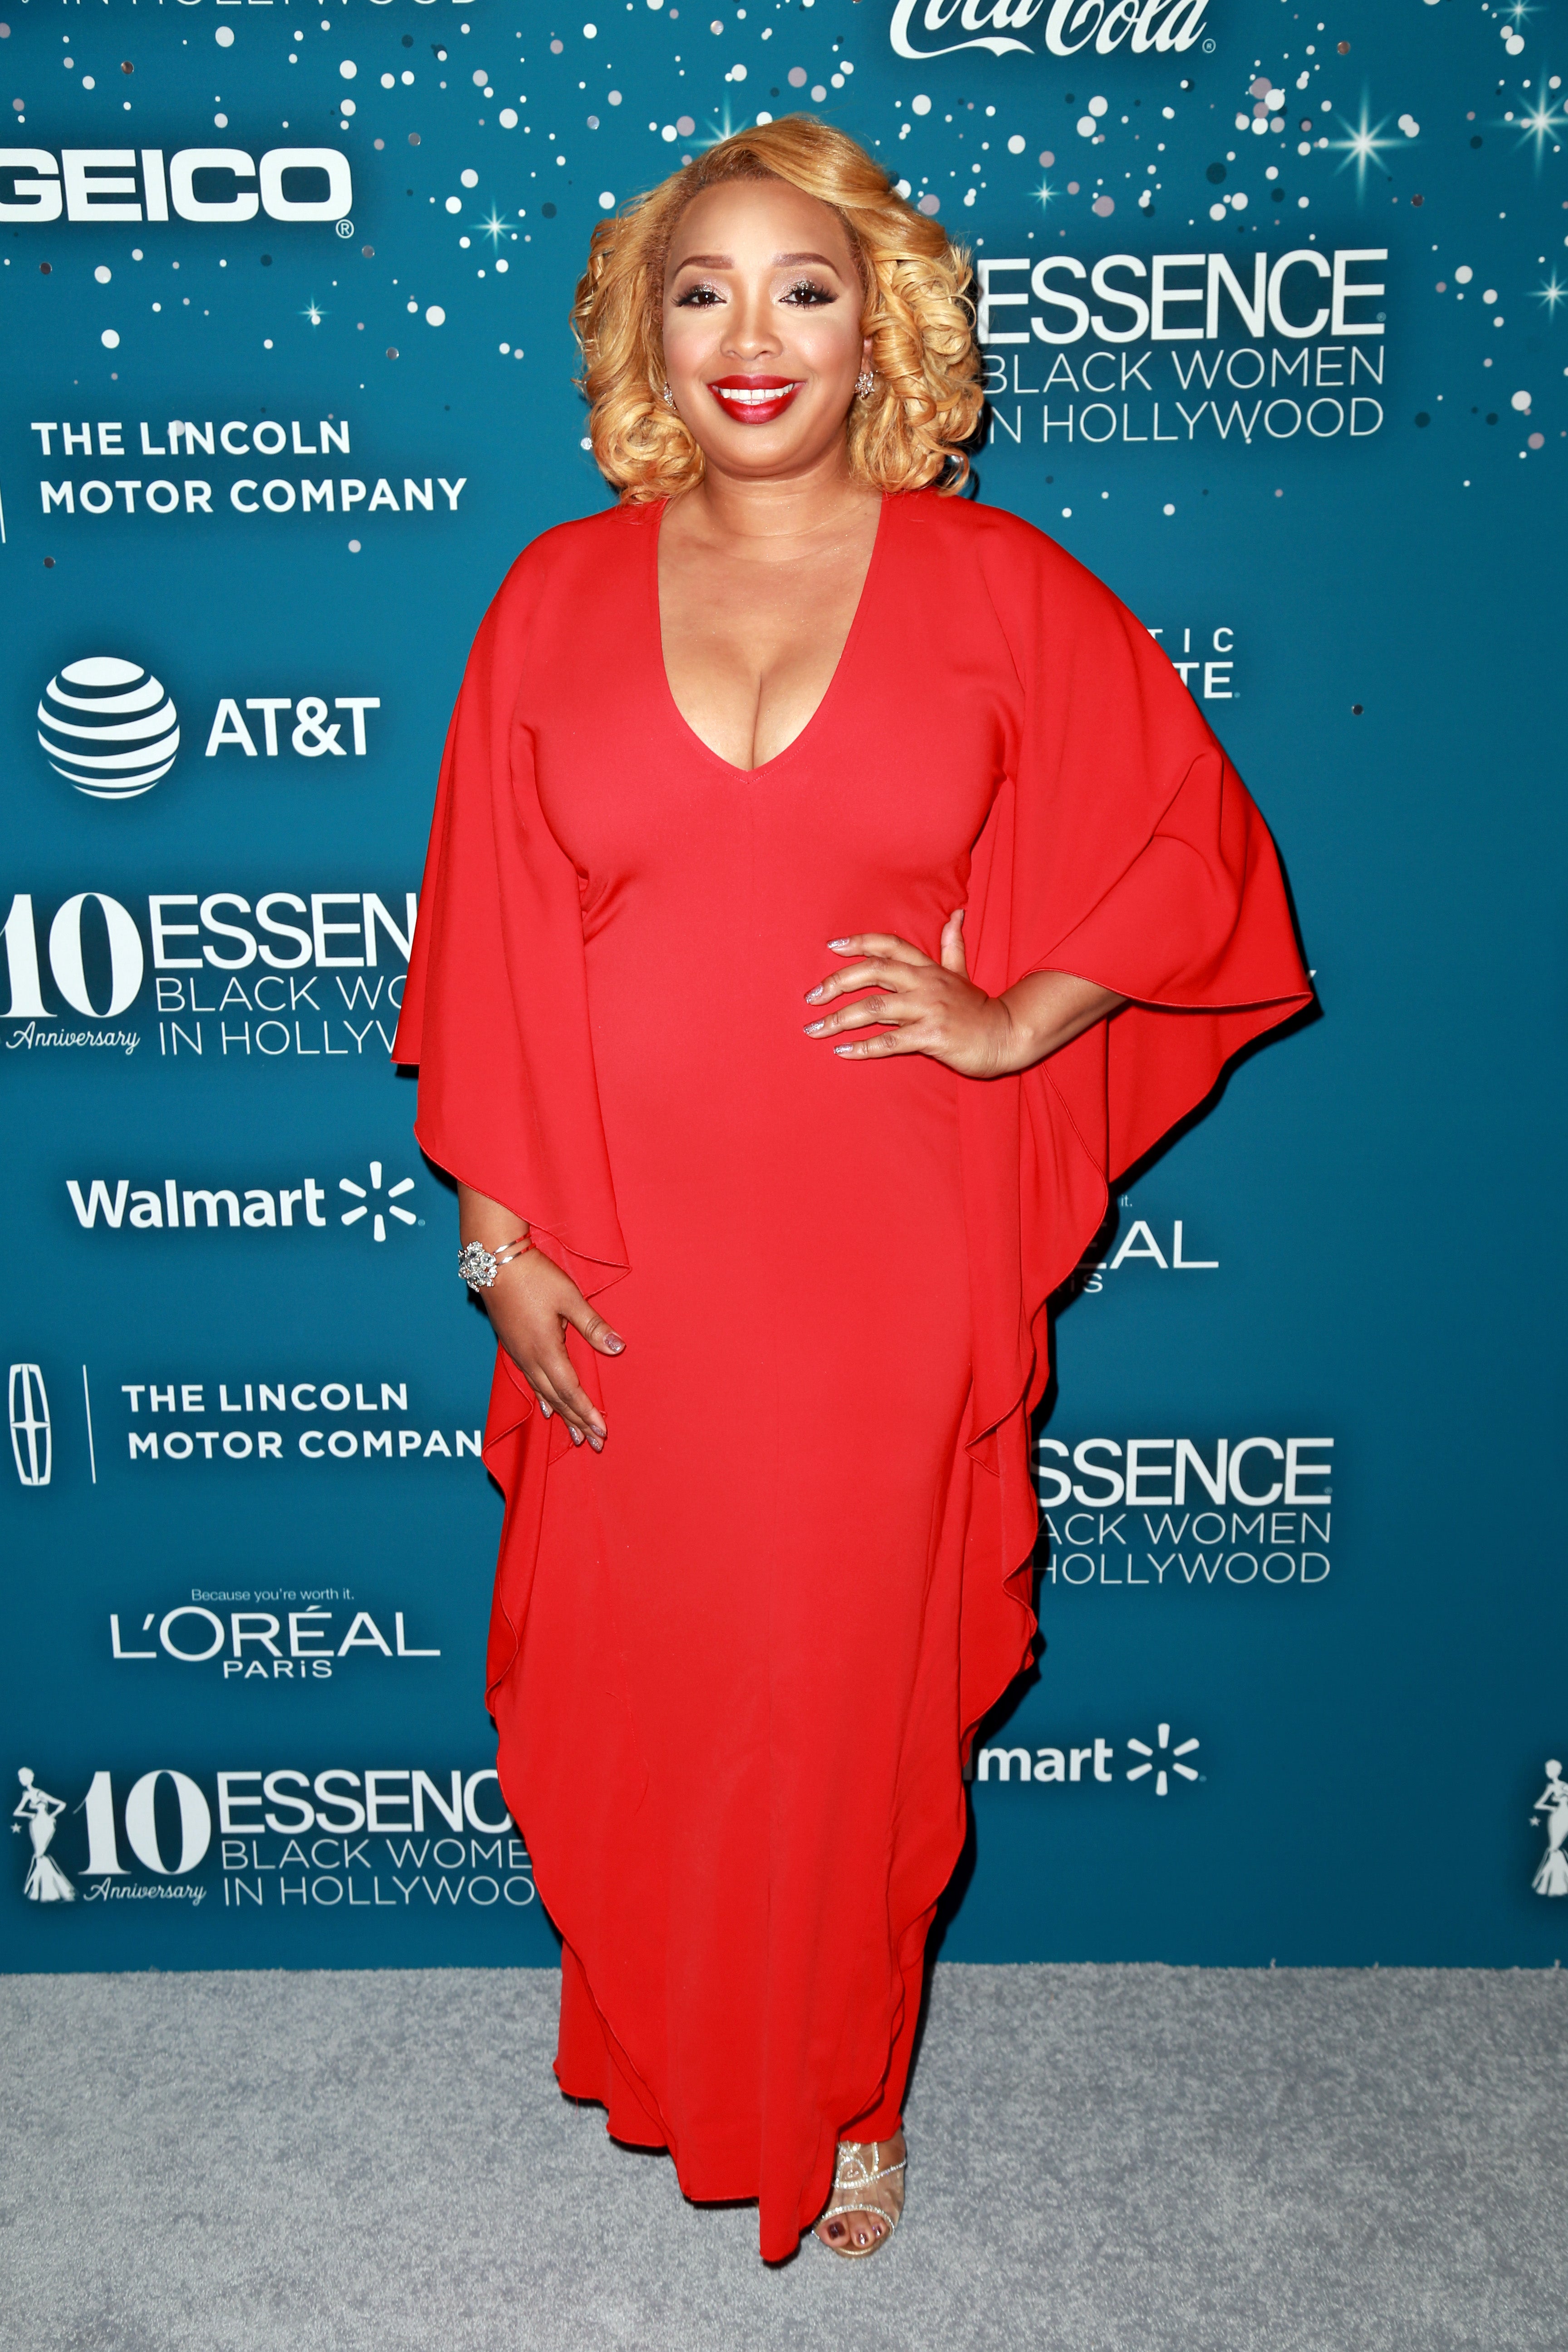 The 10th Annual Black Women in Hollywood Red Carpet Was Beyond Fabulous